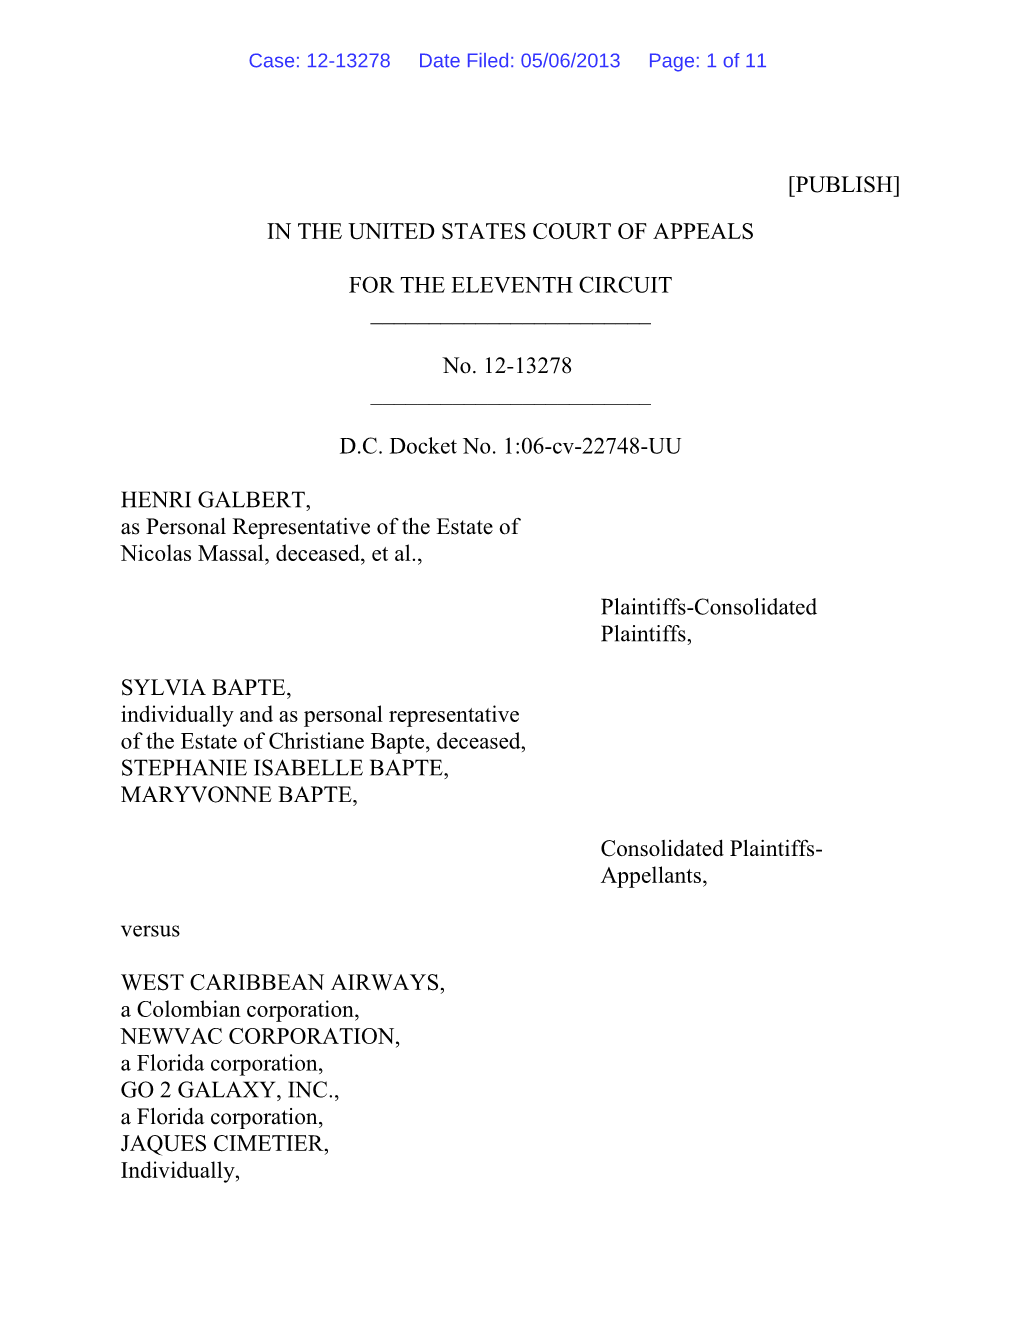 [Publish] in the United States Court of Appeals For